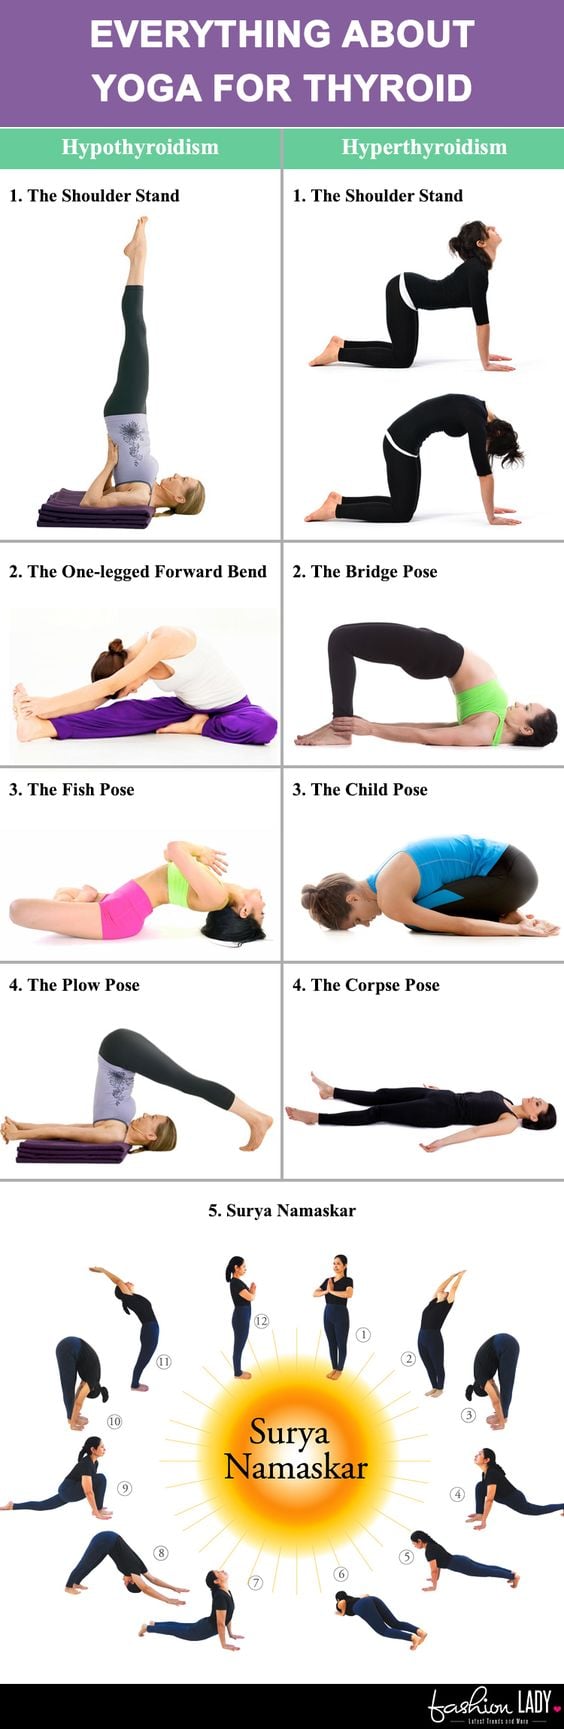 Everything That You Need To Know About Yoga For Thyroid